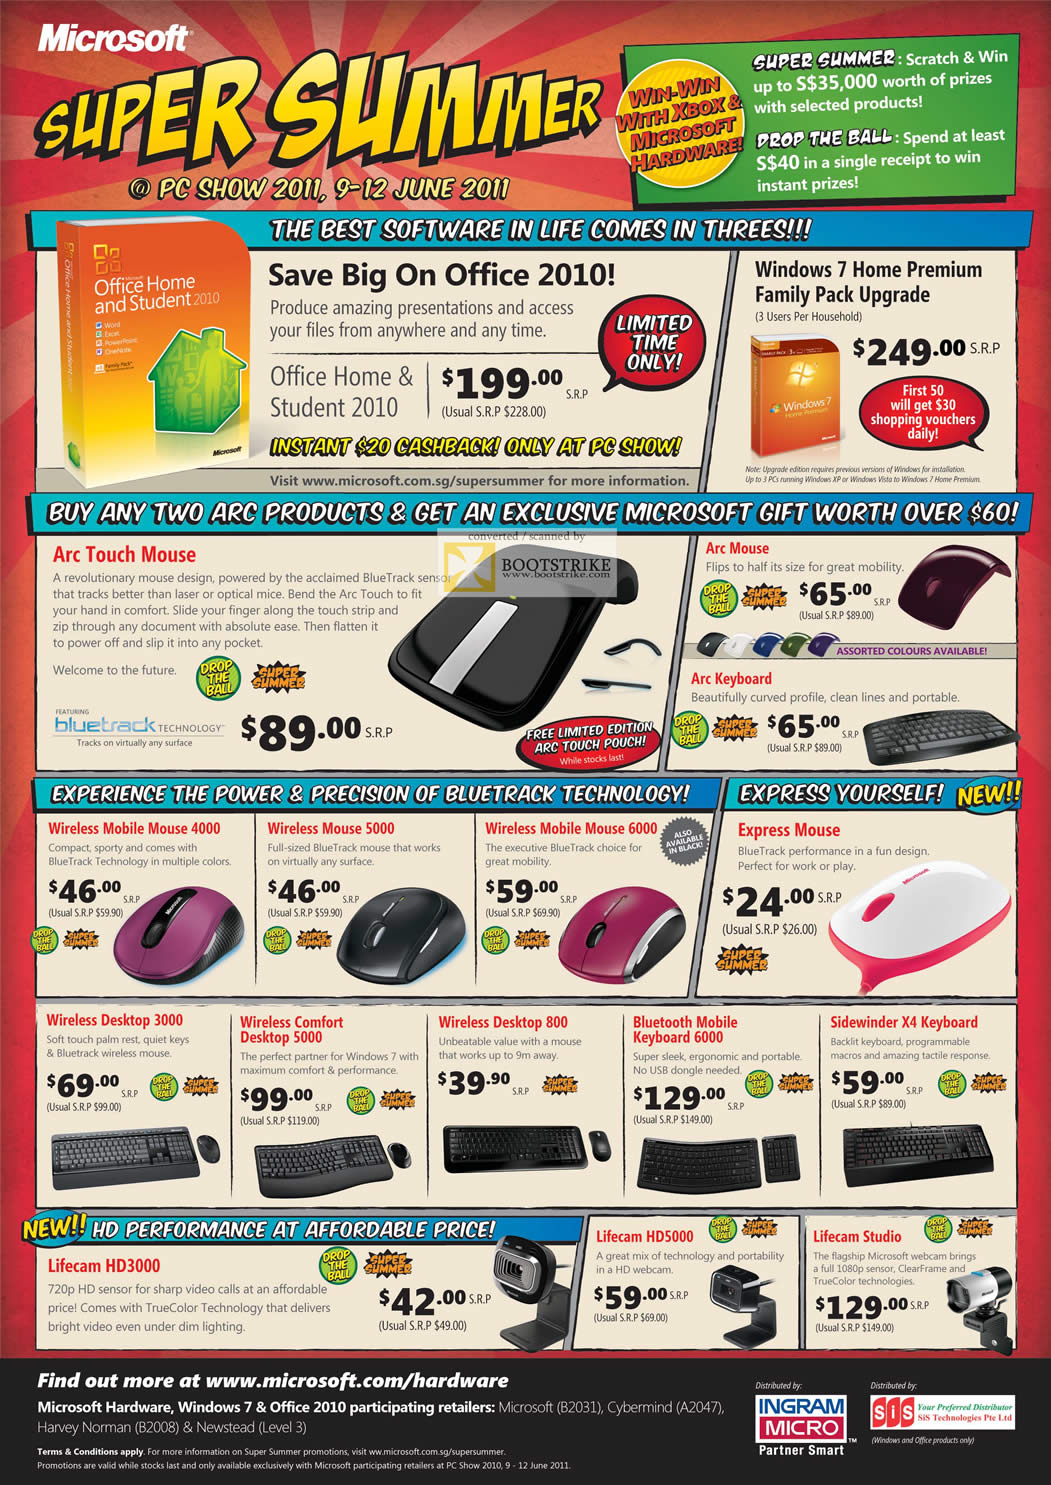 PC Show 2011 price list image brochure of Microsoft Office 2010 Windows 7 Family Pack Arc Touch Mouse Keyboard Wireless Mobile Express Webcam Lifecam Comfort Bluetooth Sidewinder